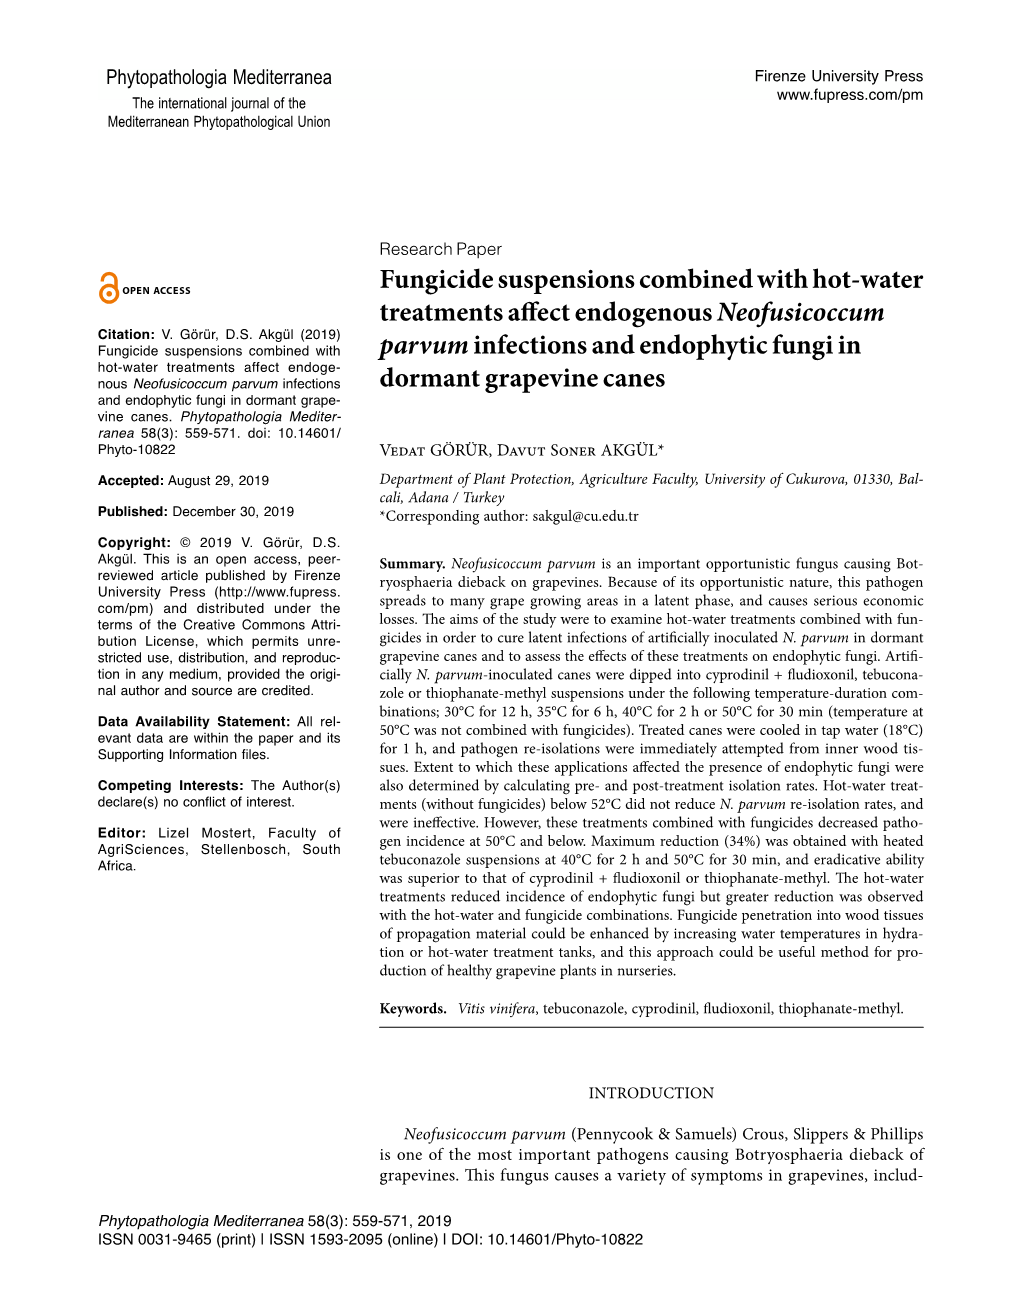 Fungicide Suspensions Combined with Hot-Water Treatments Affect Endogenous Neofusicoccum Citation: V